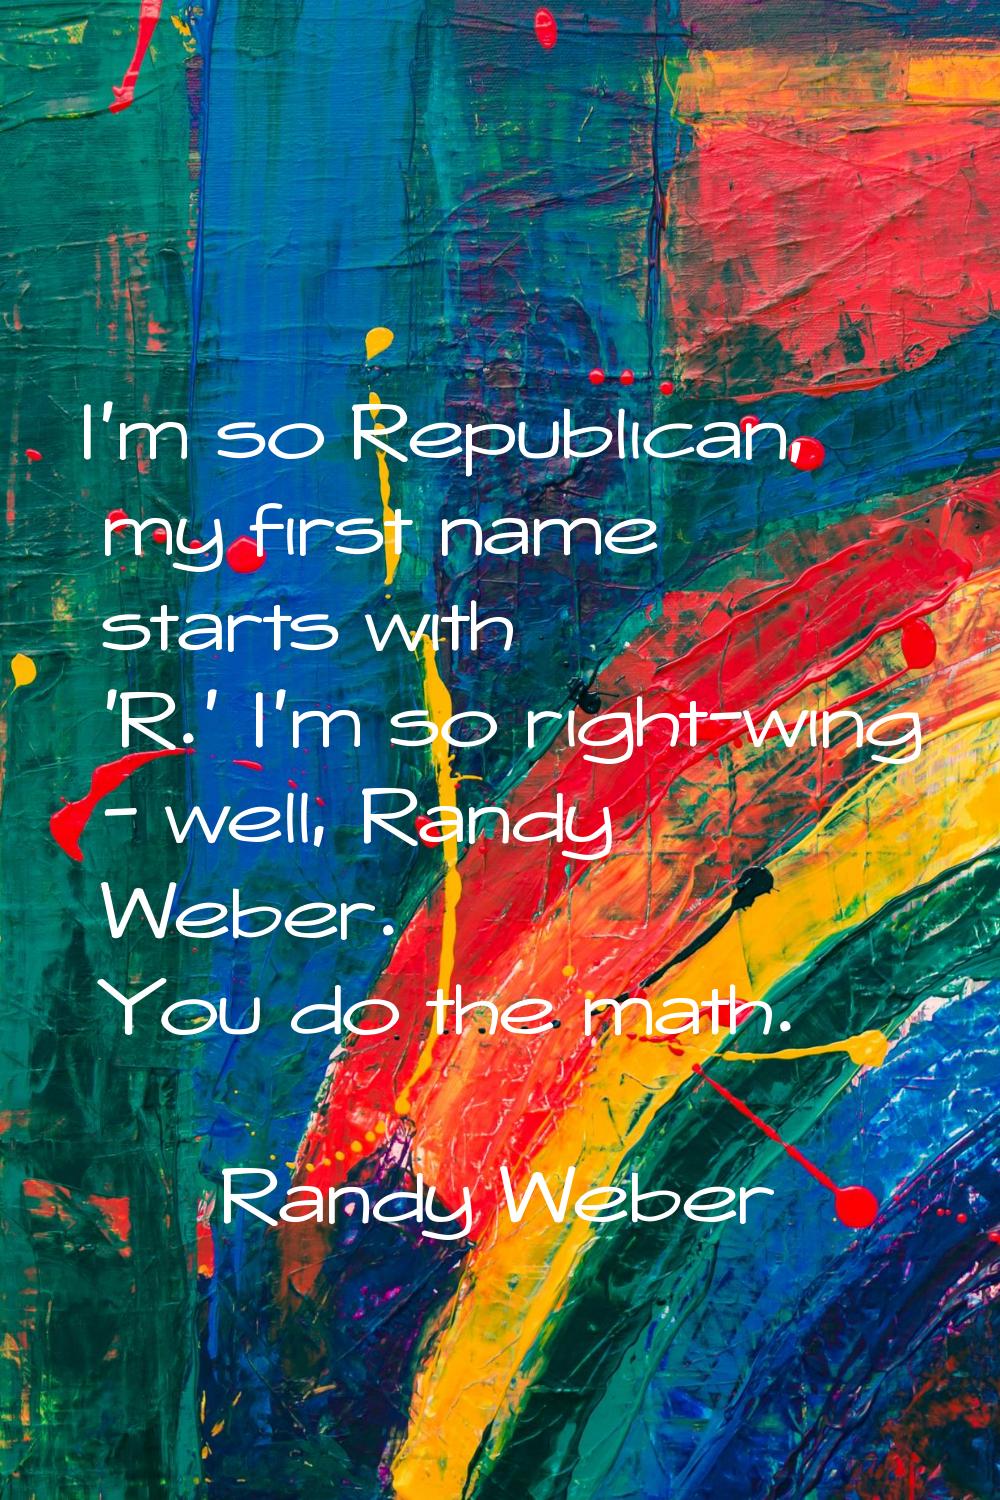 I'm so Republican, my first name starts with 'R.' I'm so right-wing - well, Randy Weber. You do the